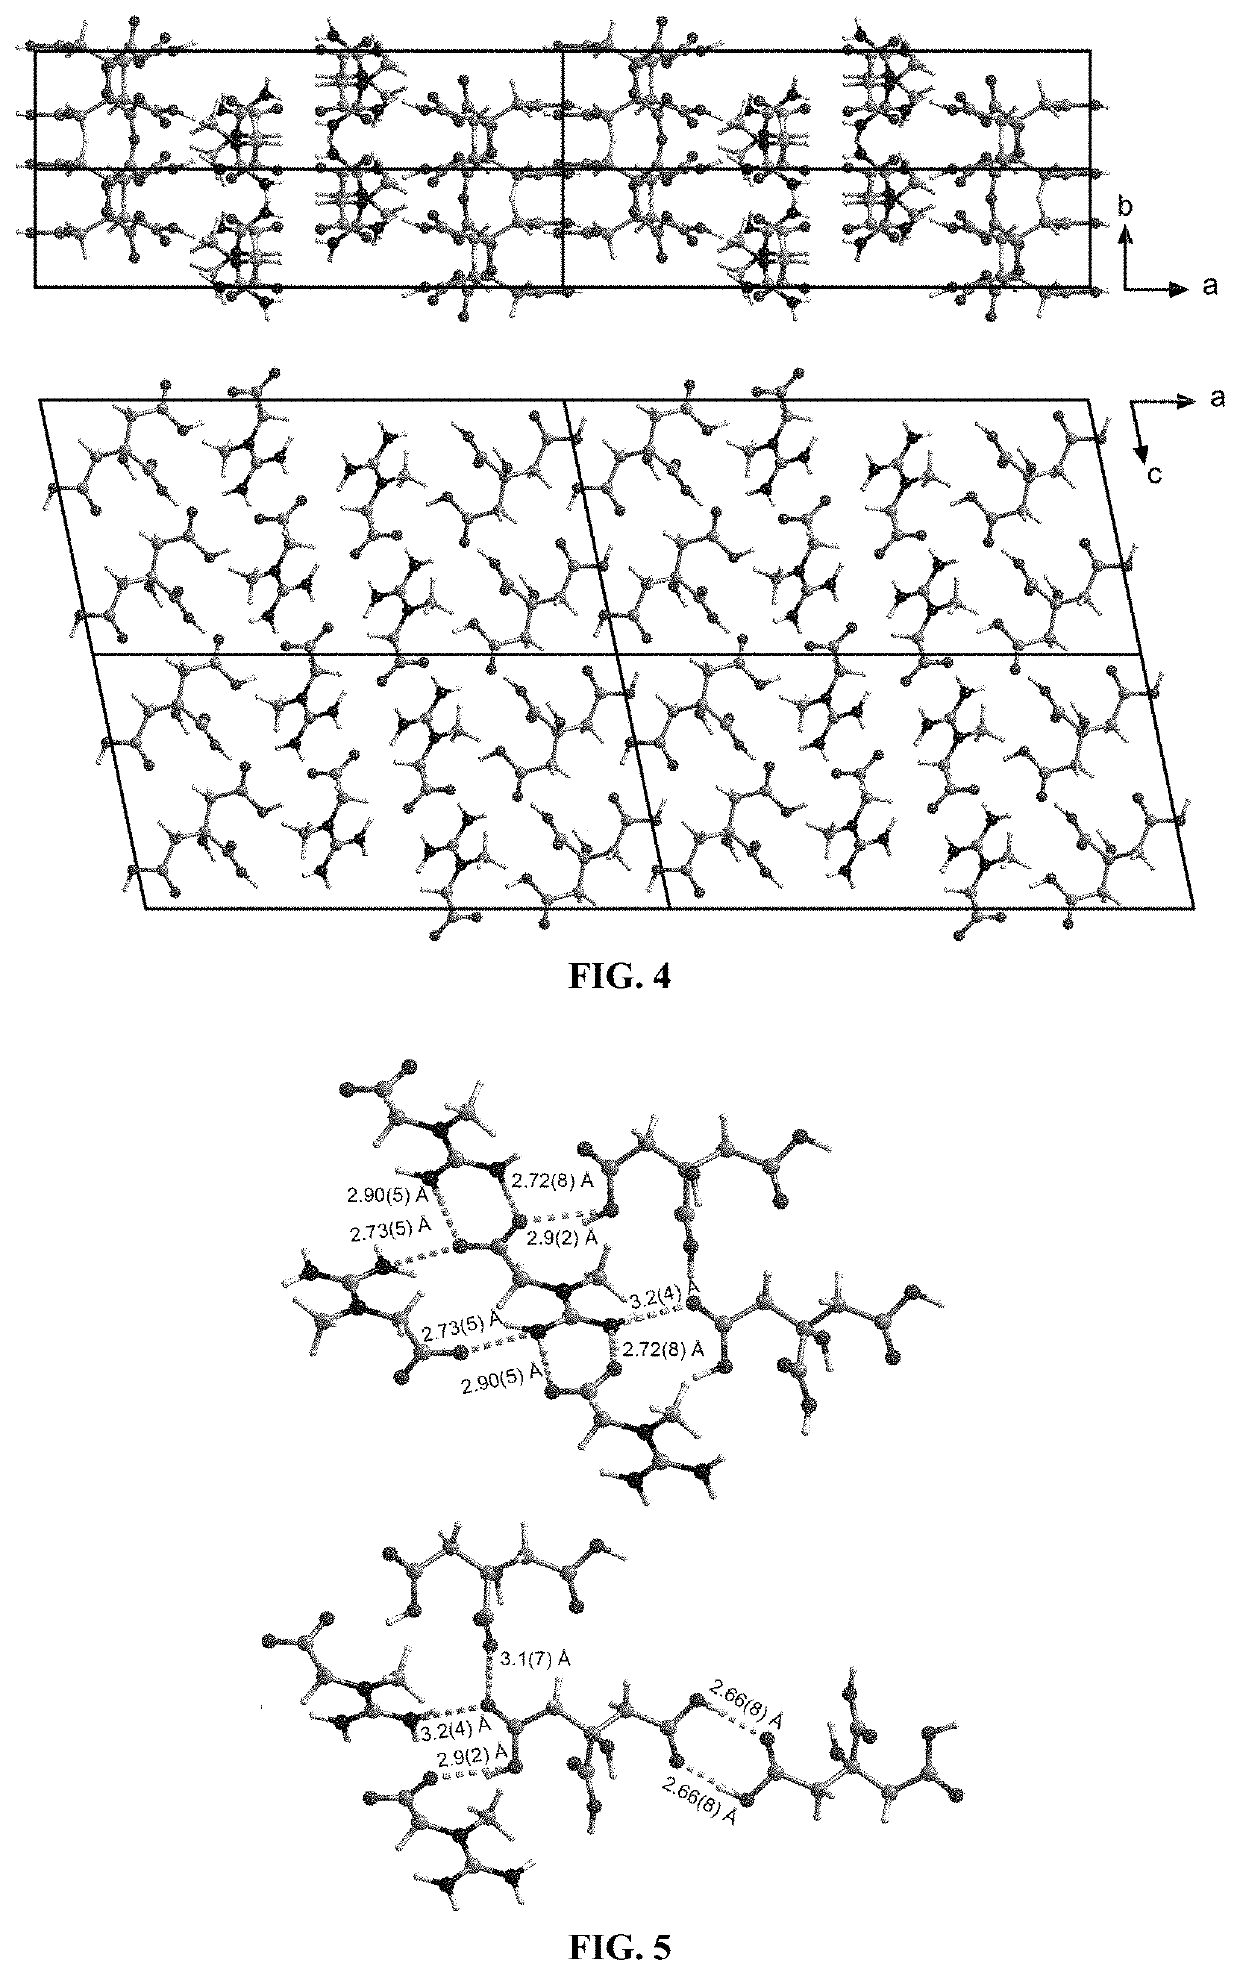 Mechanosynthesis of a Co-Amorphous Formulation of Creatine with Citric Acid and Humidity-Mediated Transformation into a Co-Crystal